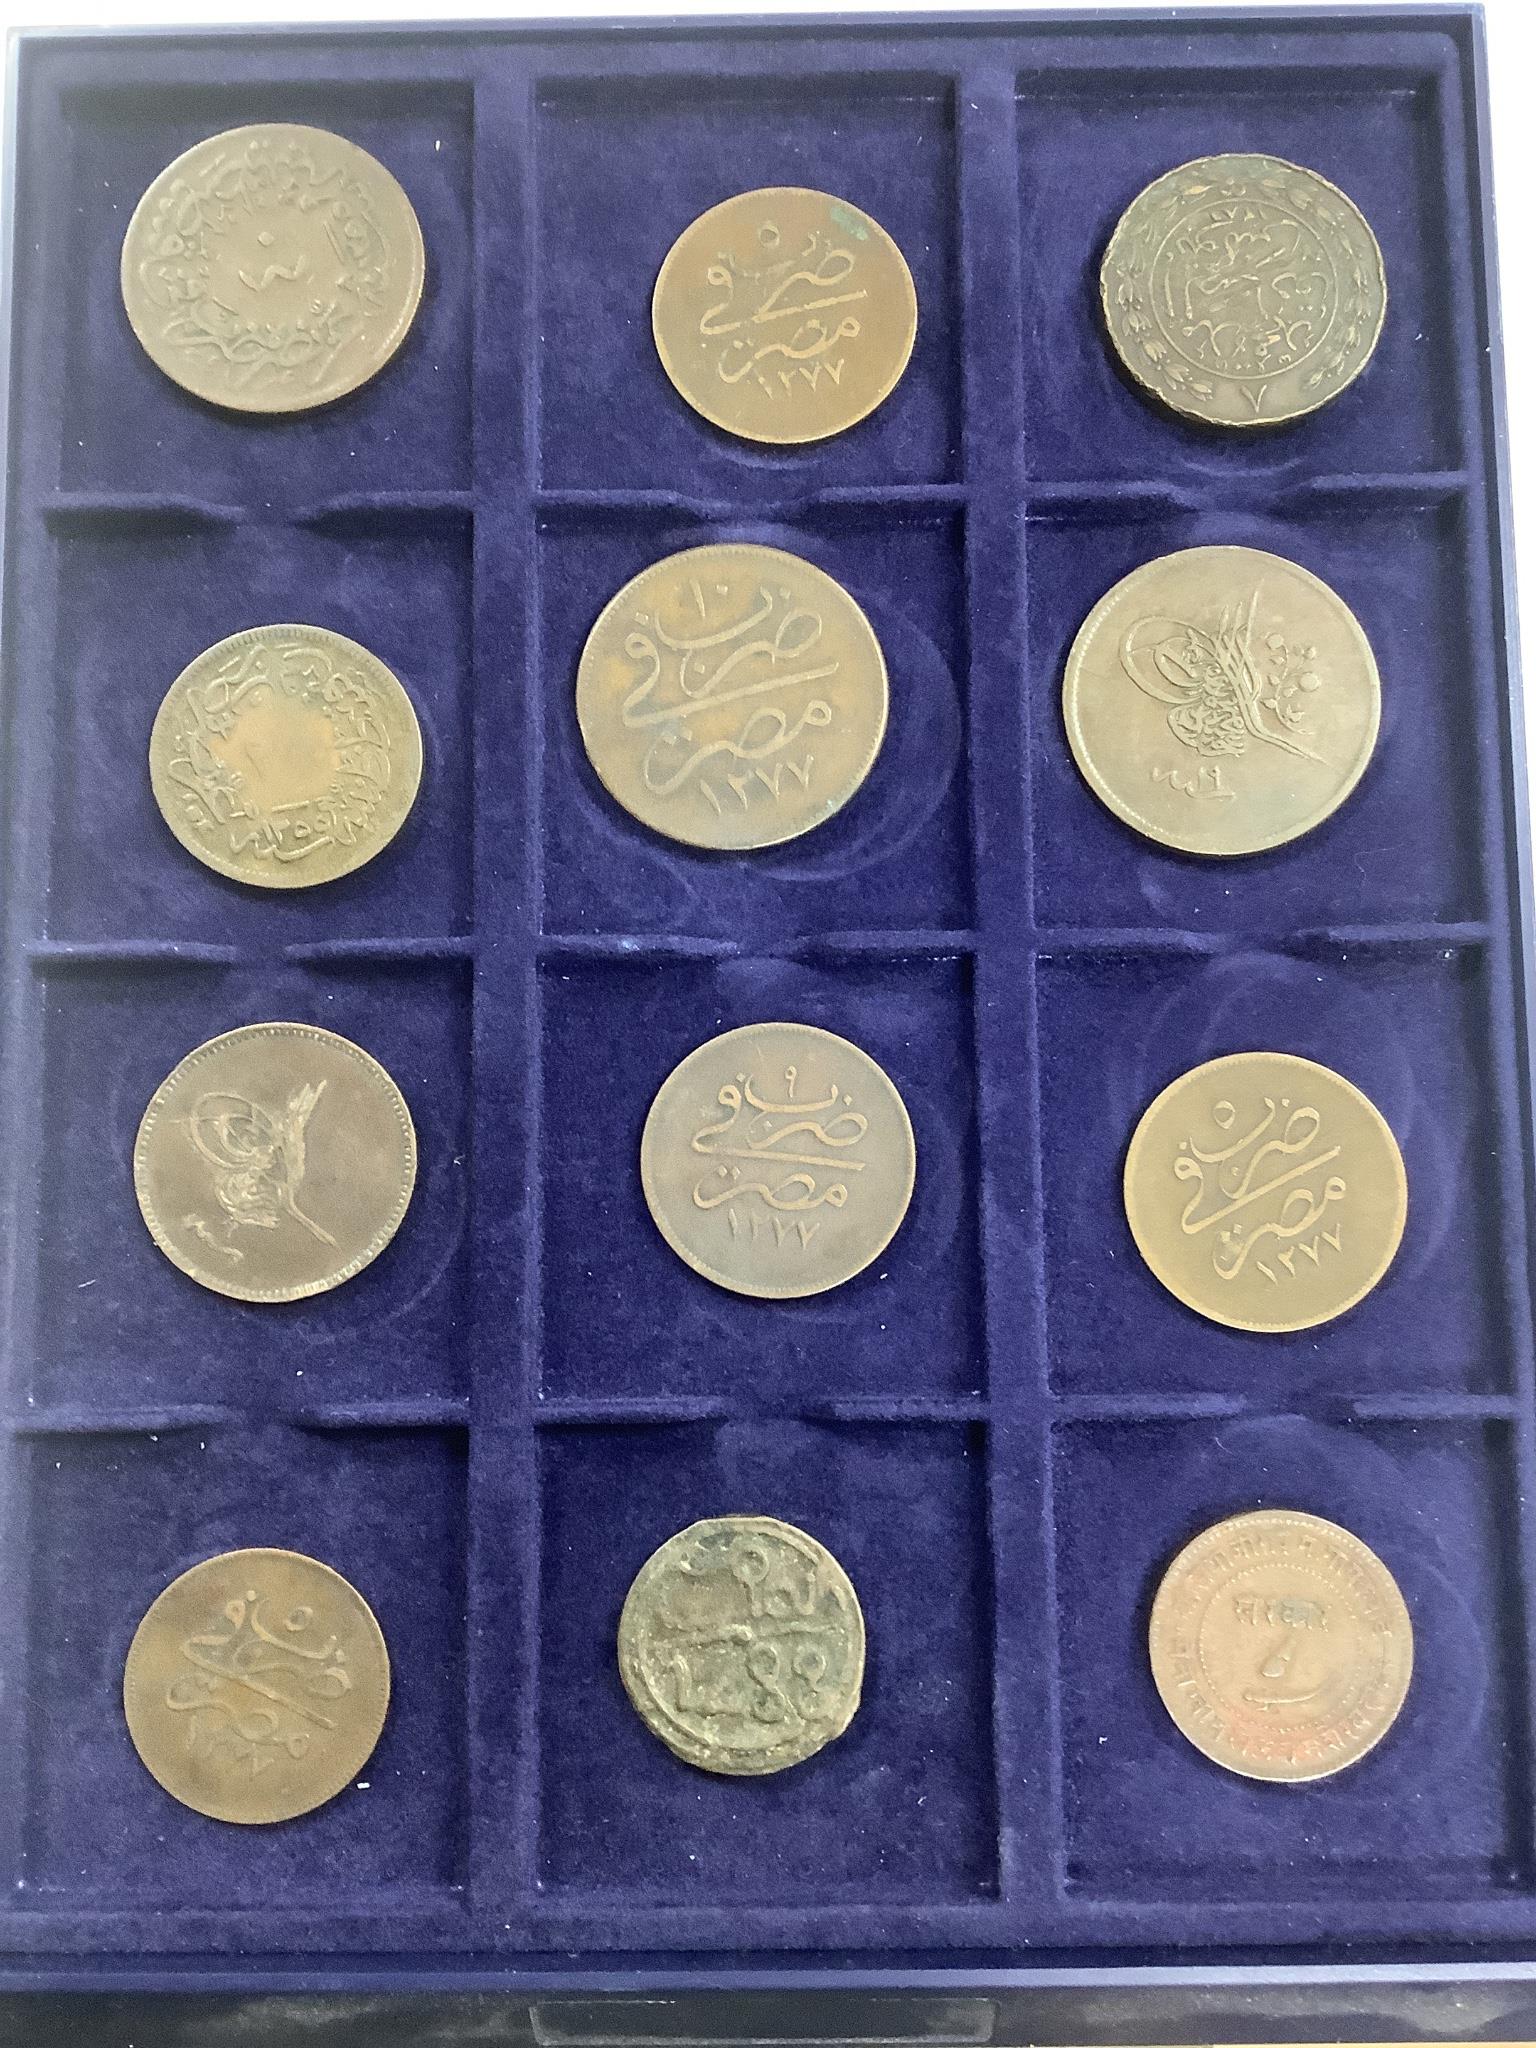 Ottoman Empire and Islamic coins, 19th/20th century, silver and bronze coinage, 12 trays - Image 5 of 13